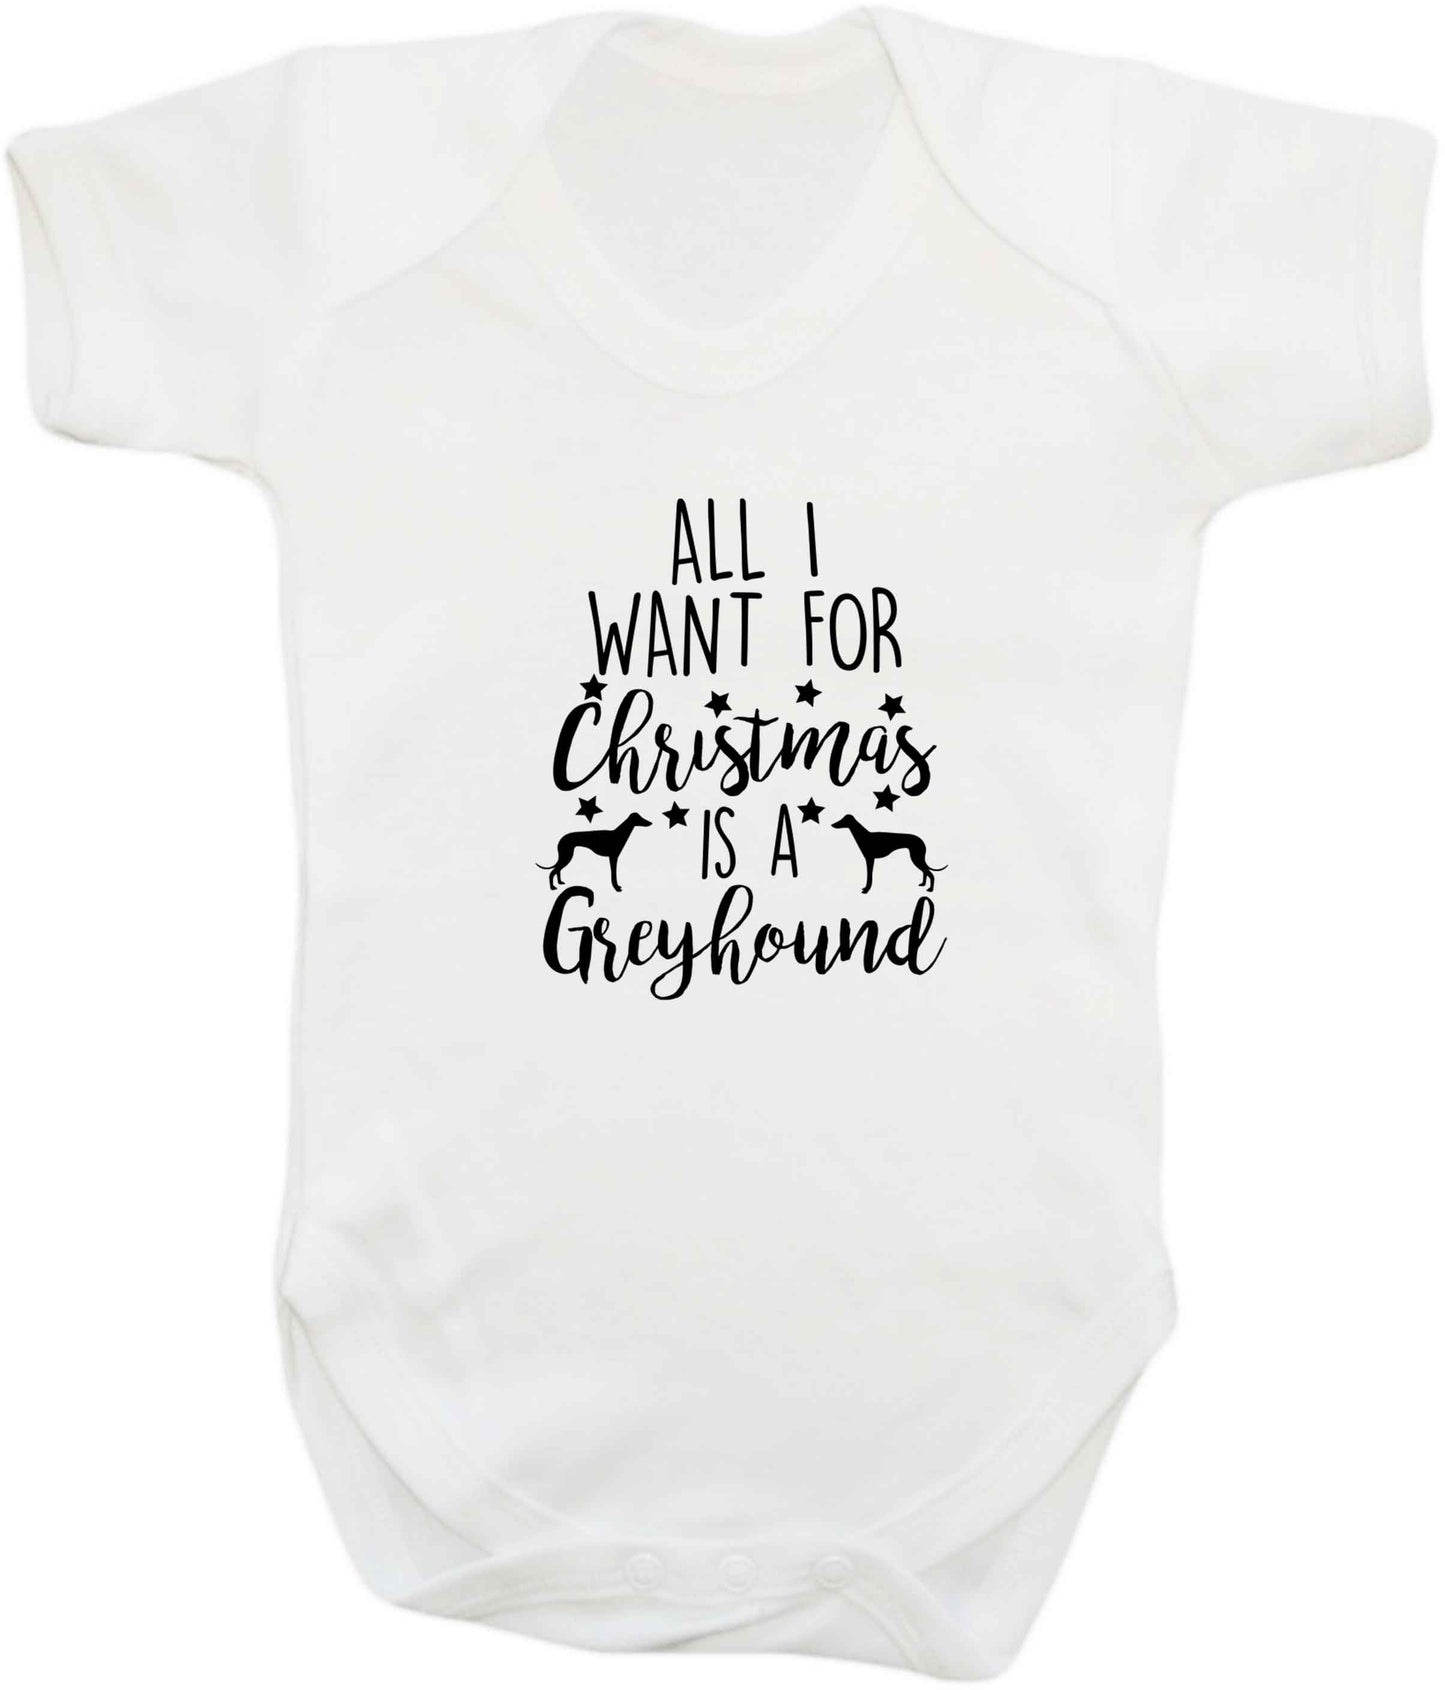 All I want for Christmas is a greyhound baby vest white 18-24 months